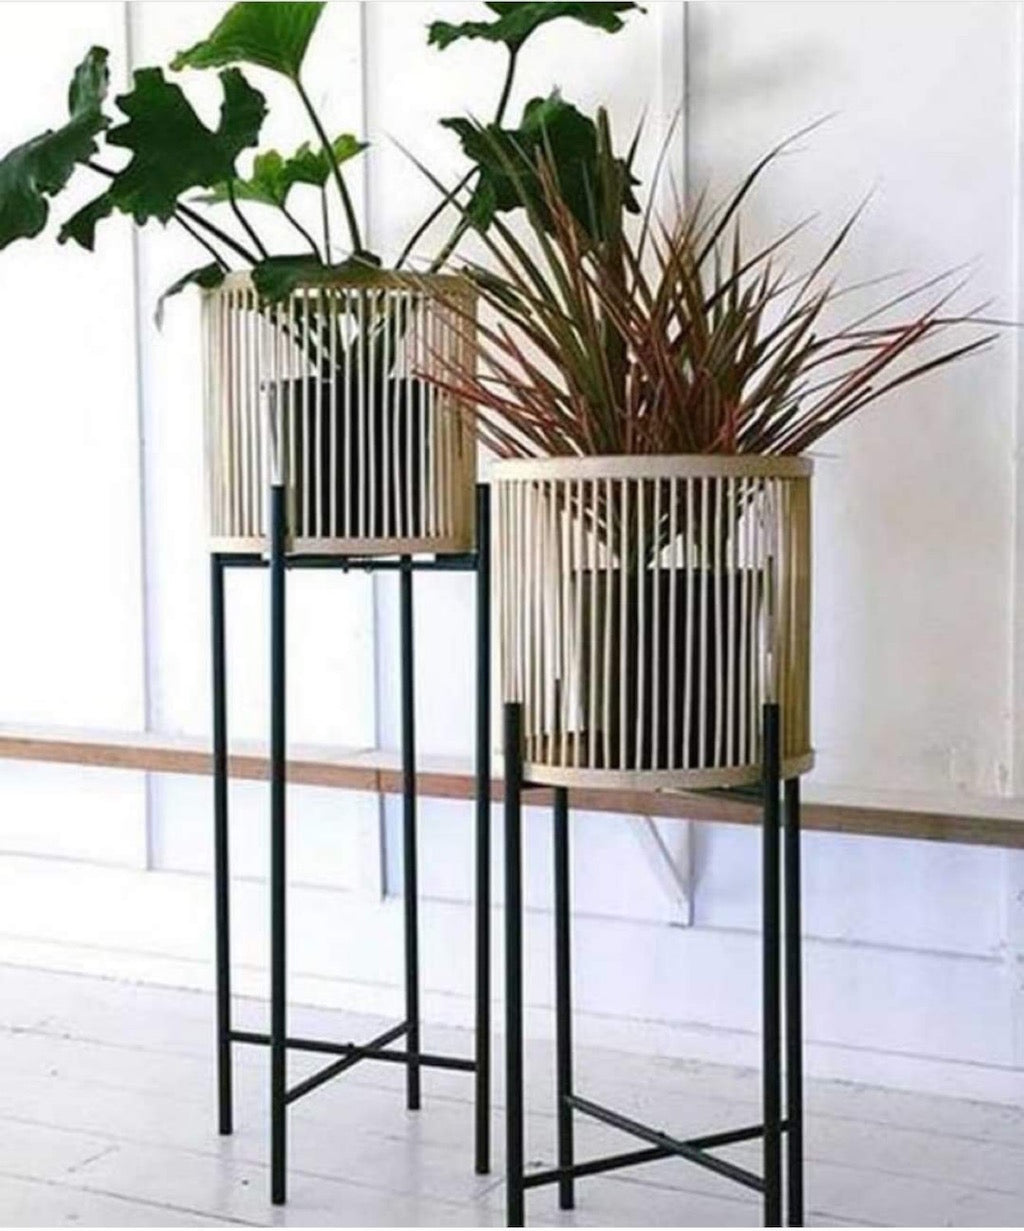 Rhythm Plant Stands - metal base - stunning natural bamboo basket - Large: 35x100cm - Small: 35x80cm - Basket size: 31x31cm | Salt&Pepper |Bliss Gifts & Homewares - Unit 8, 259 Princes Hwy Ulladulla - Shop Online & In store - 0427795959, 44541523 - Australia wide shipping 